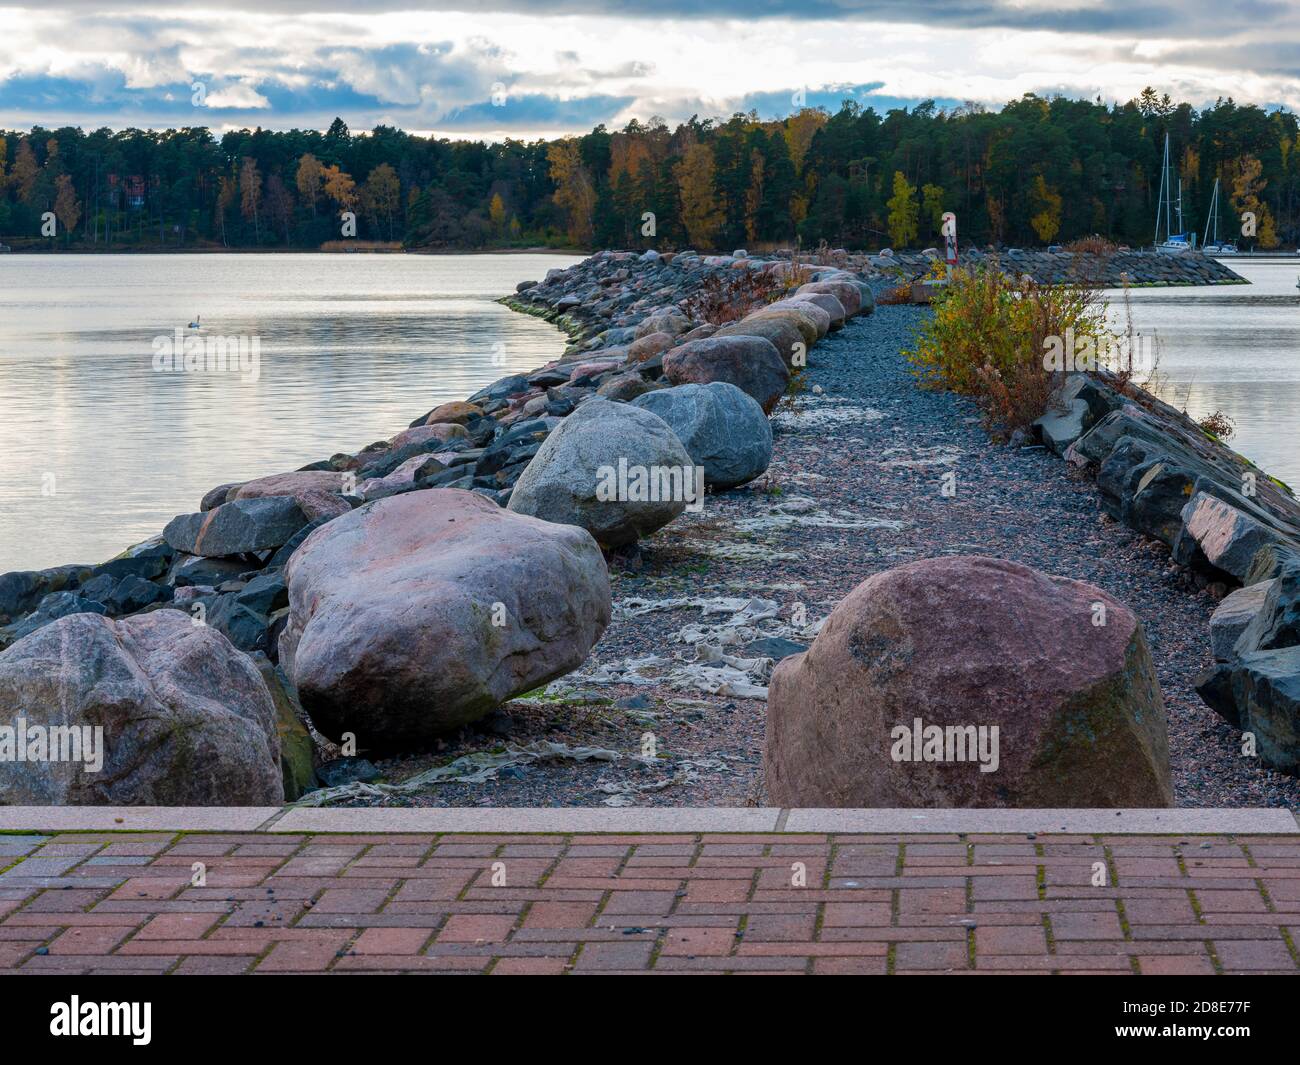 Helsinki/Finland - OCTOBER 16, 2020: A view of a large granite based break water in the leisure boat harbor. Stock Photo